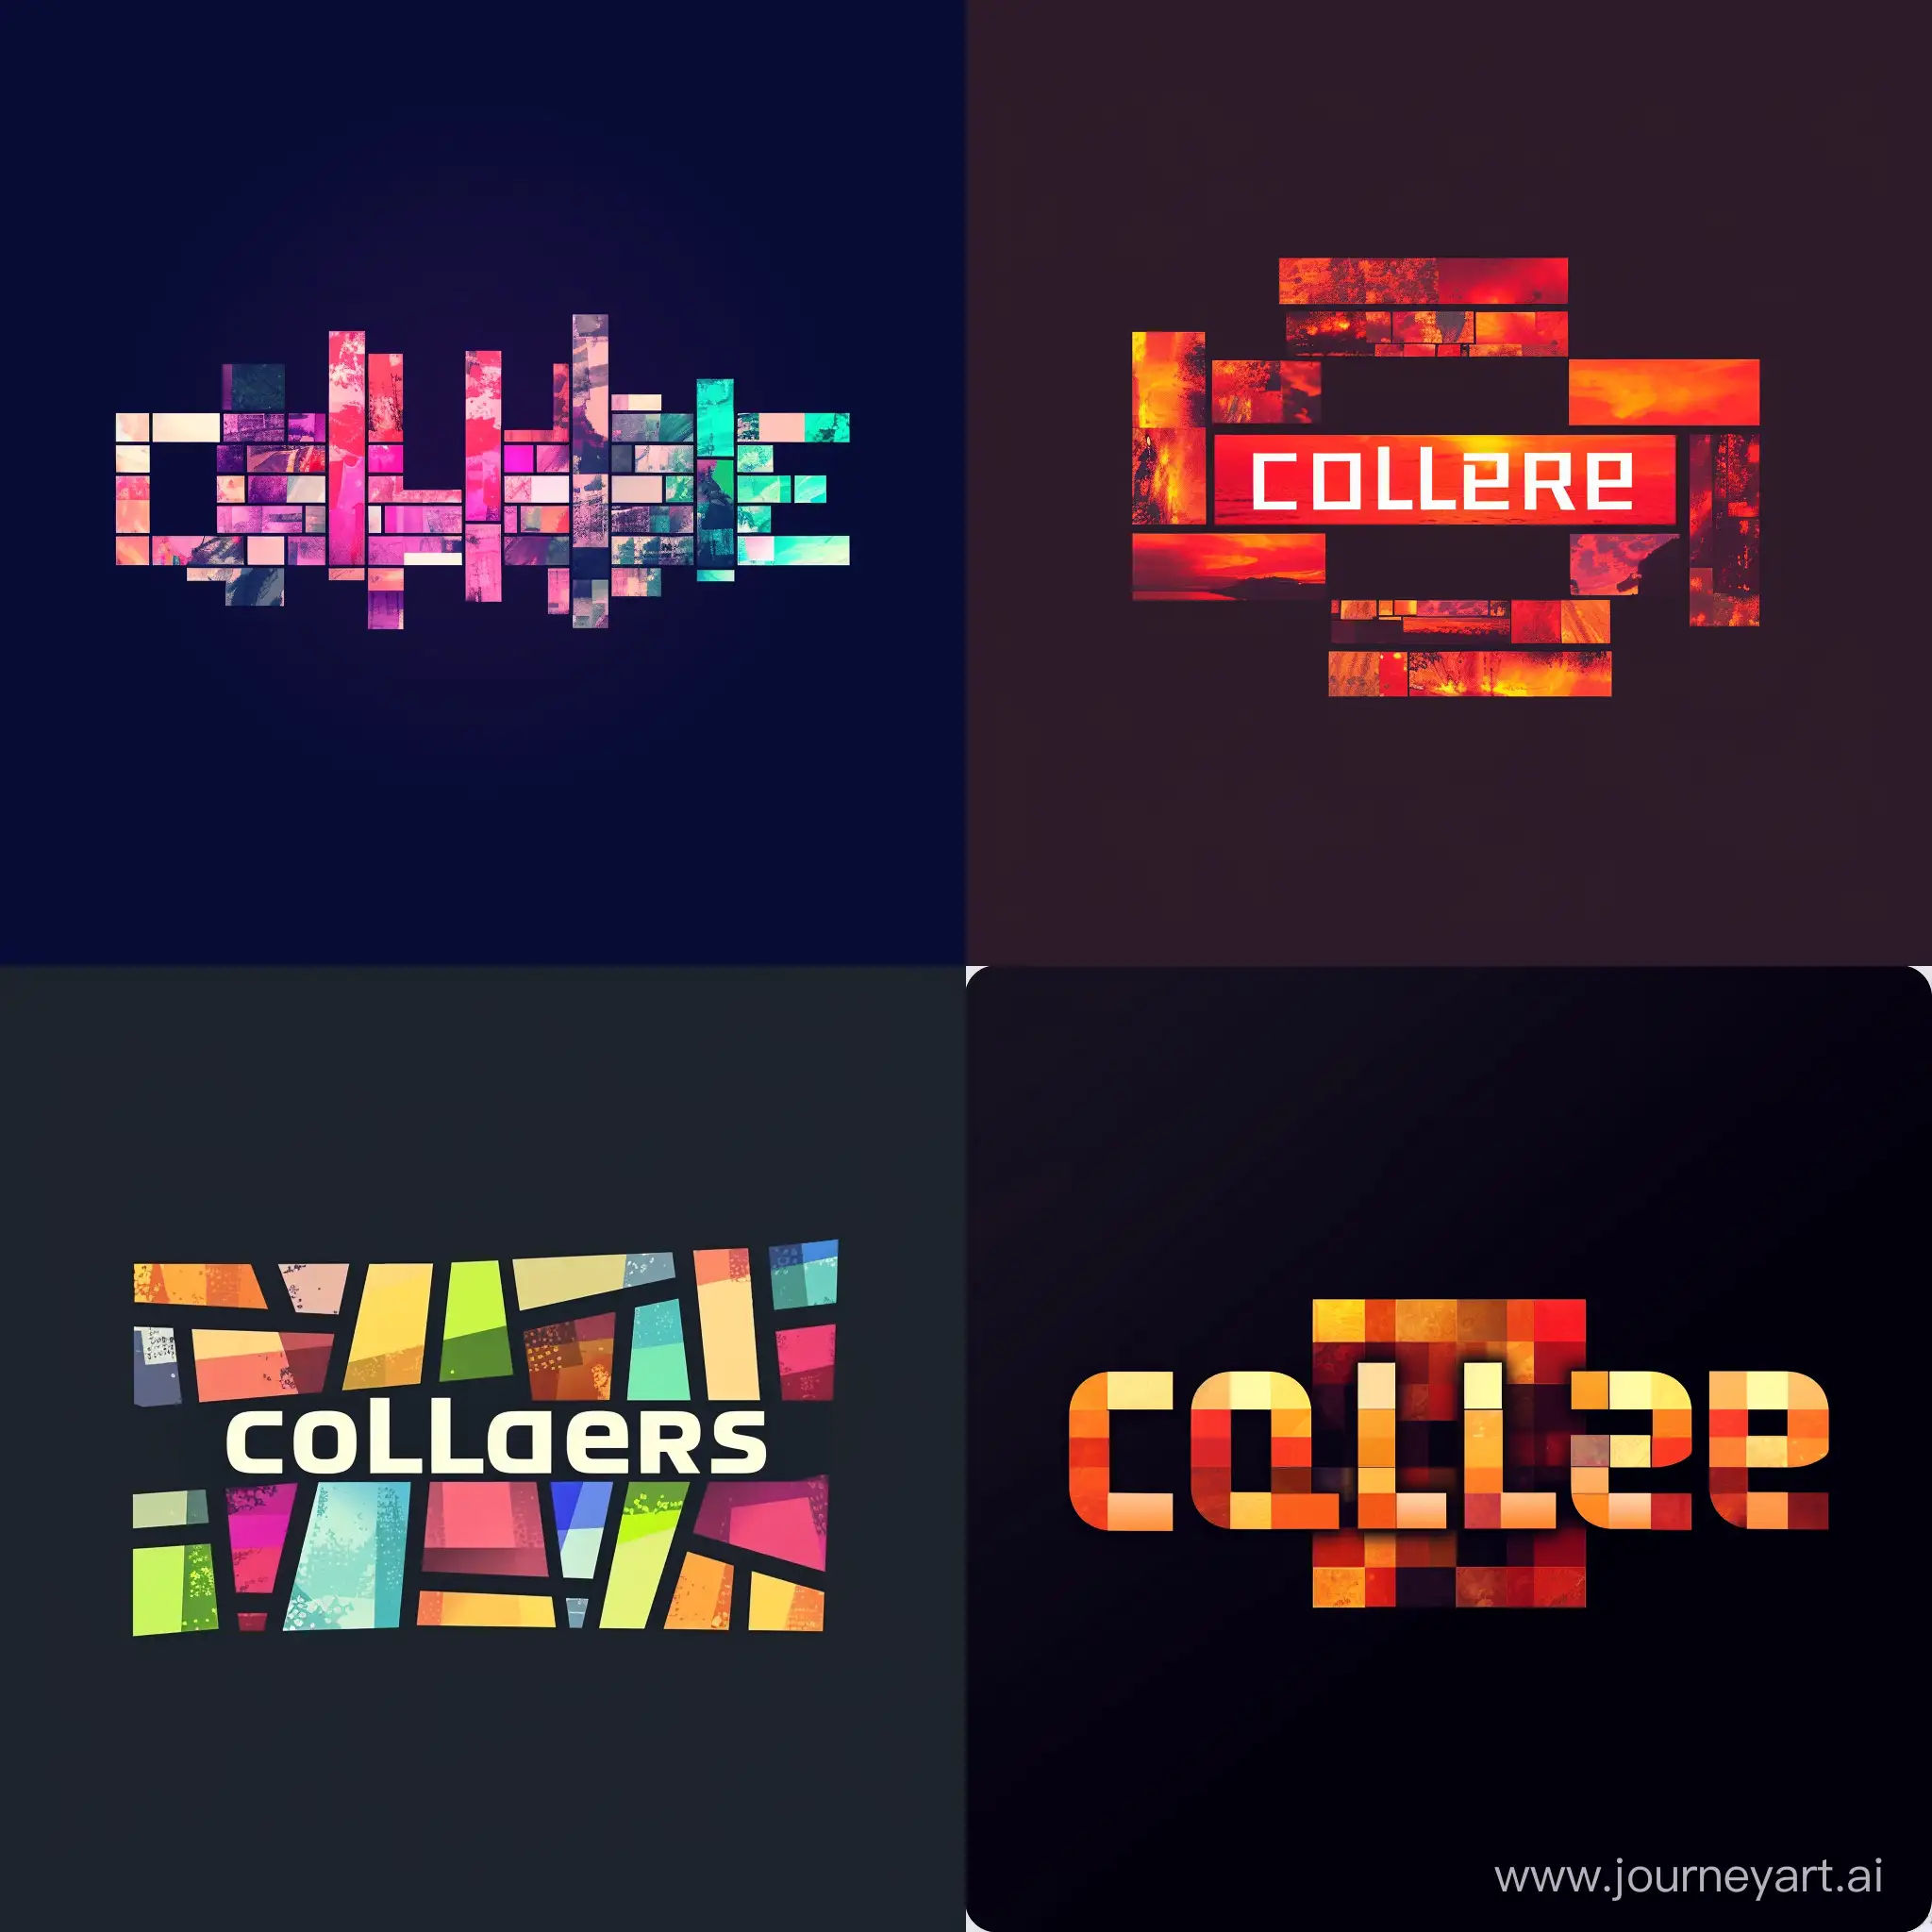 Logo for app, which creates collages of images. It should be simple and contain the word "collager" capitalized. It should be composed from rectangles, which would look like mosaic